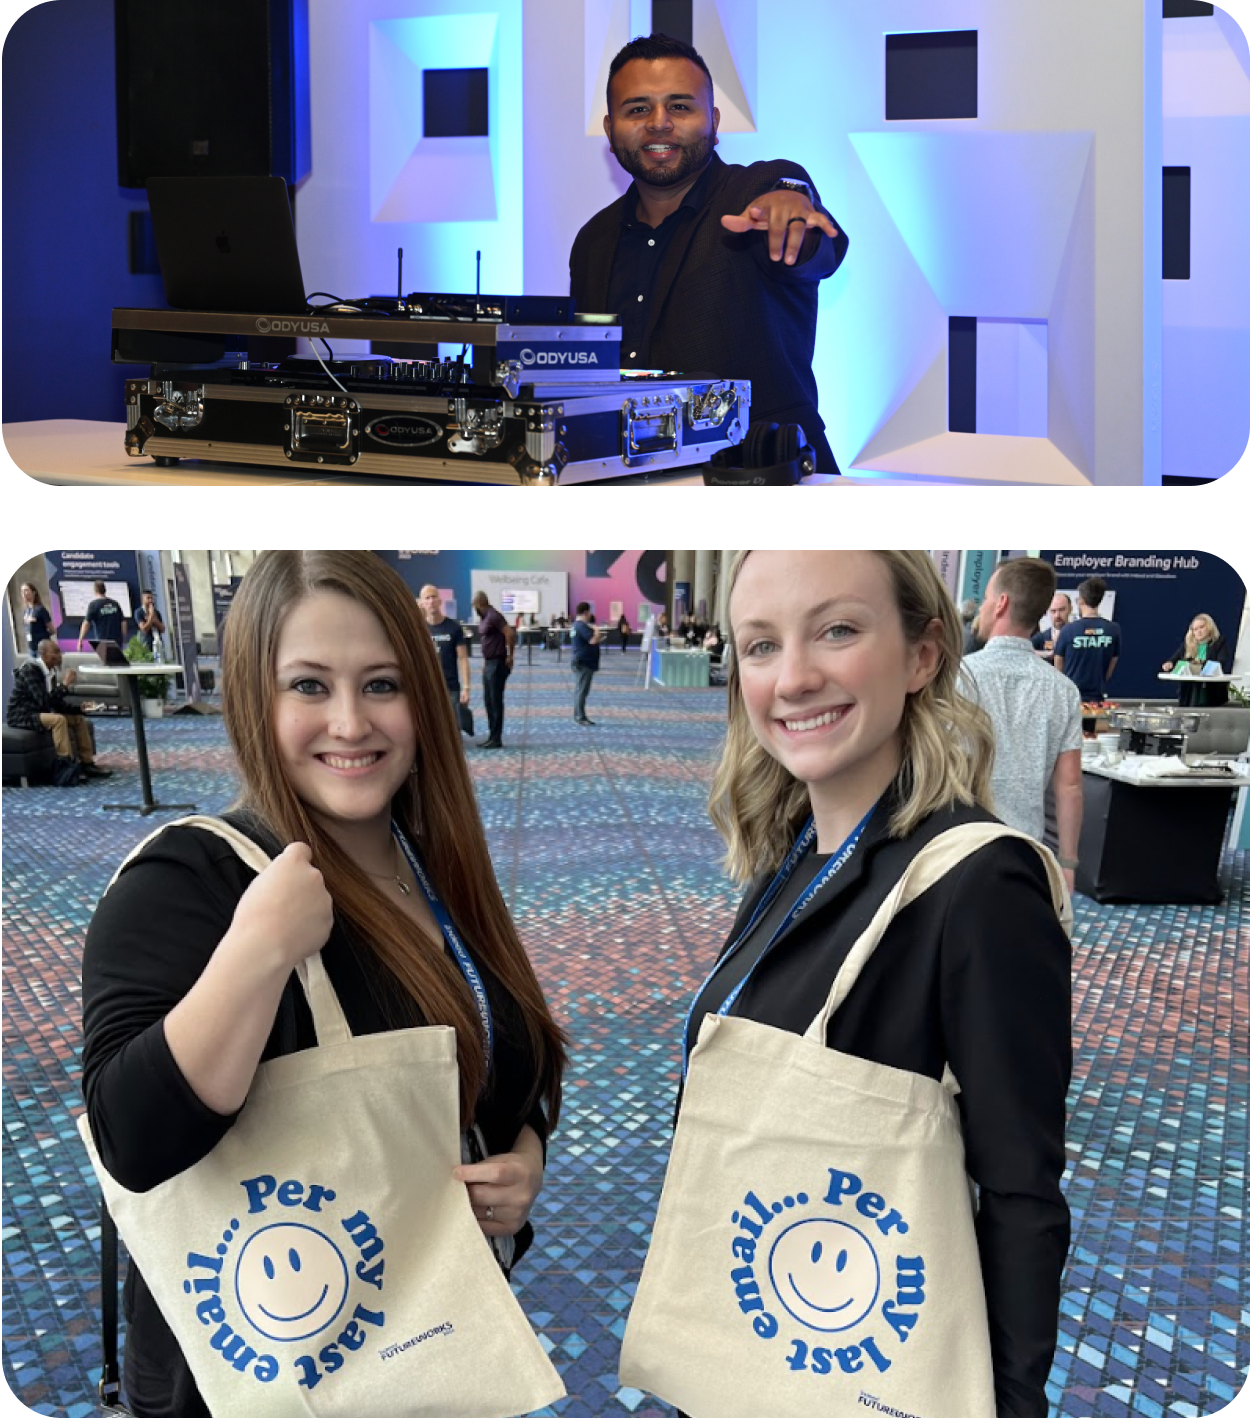 DJ playing music and Two women smiling with bags that say “Per my last email…”